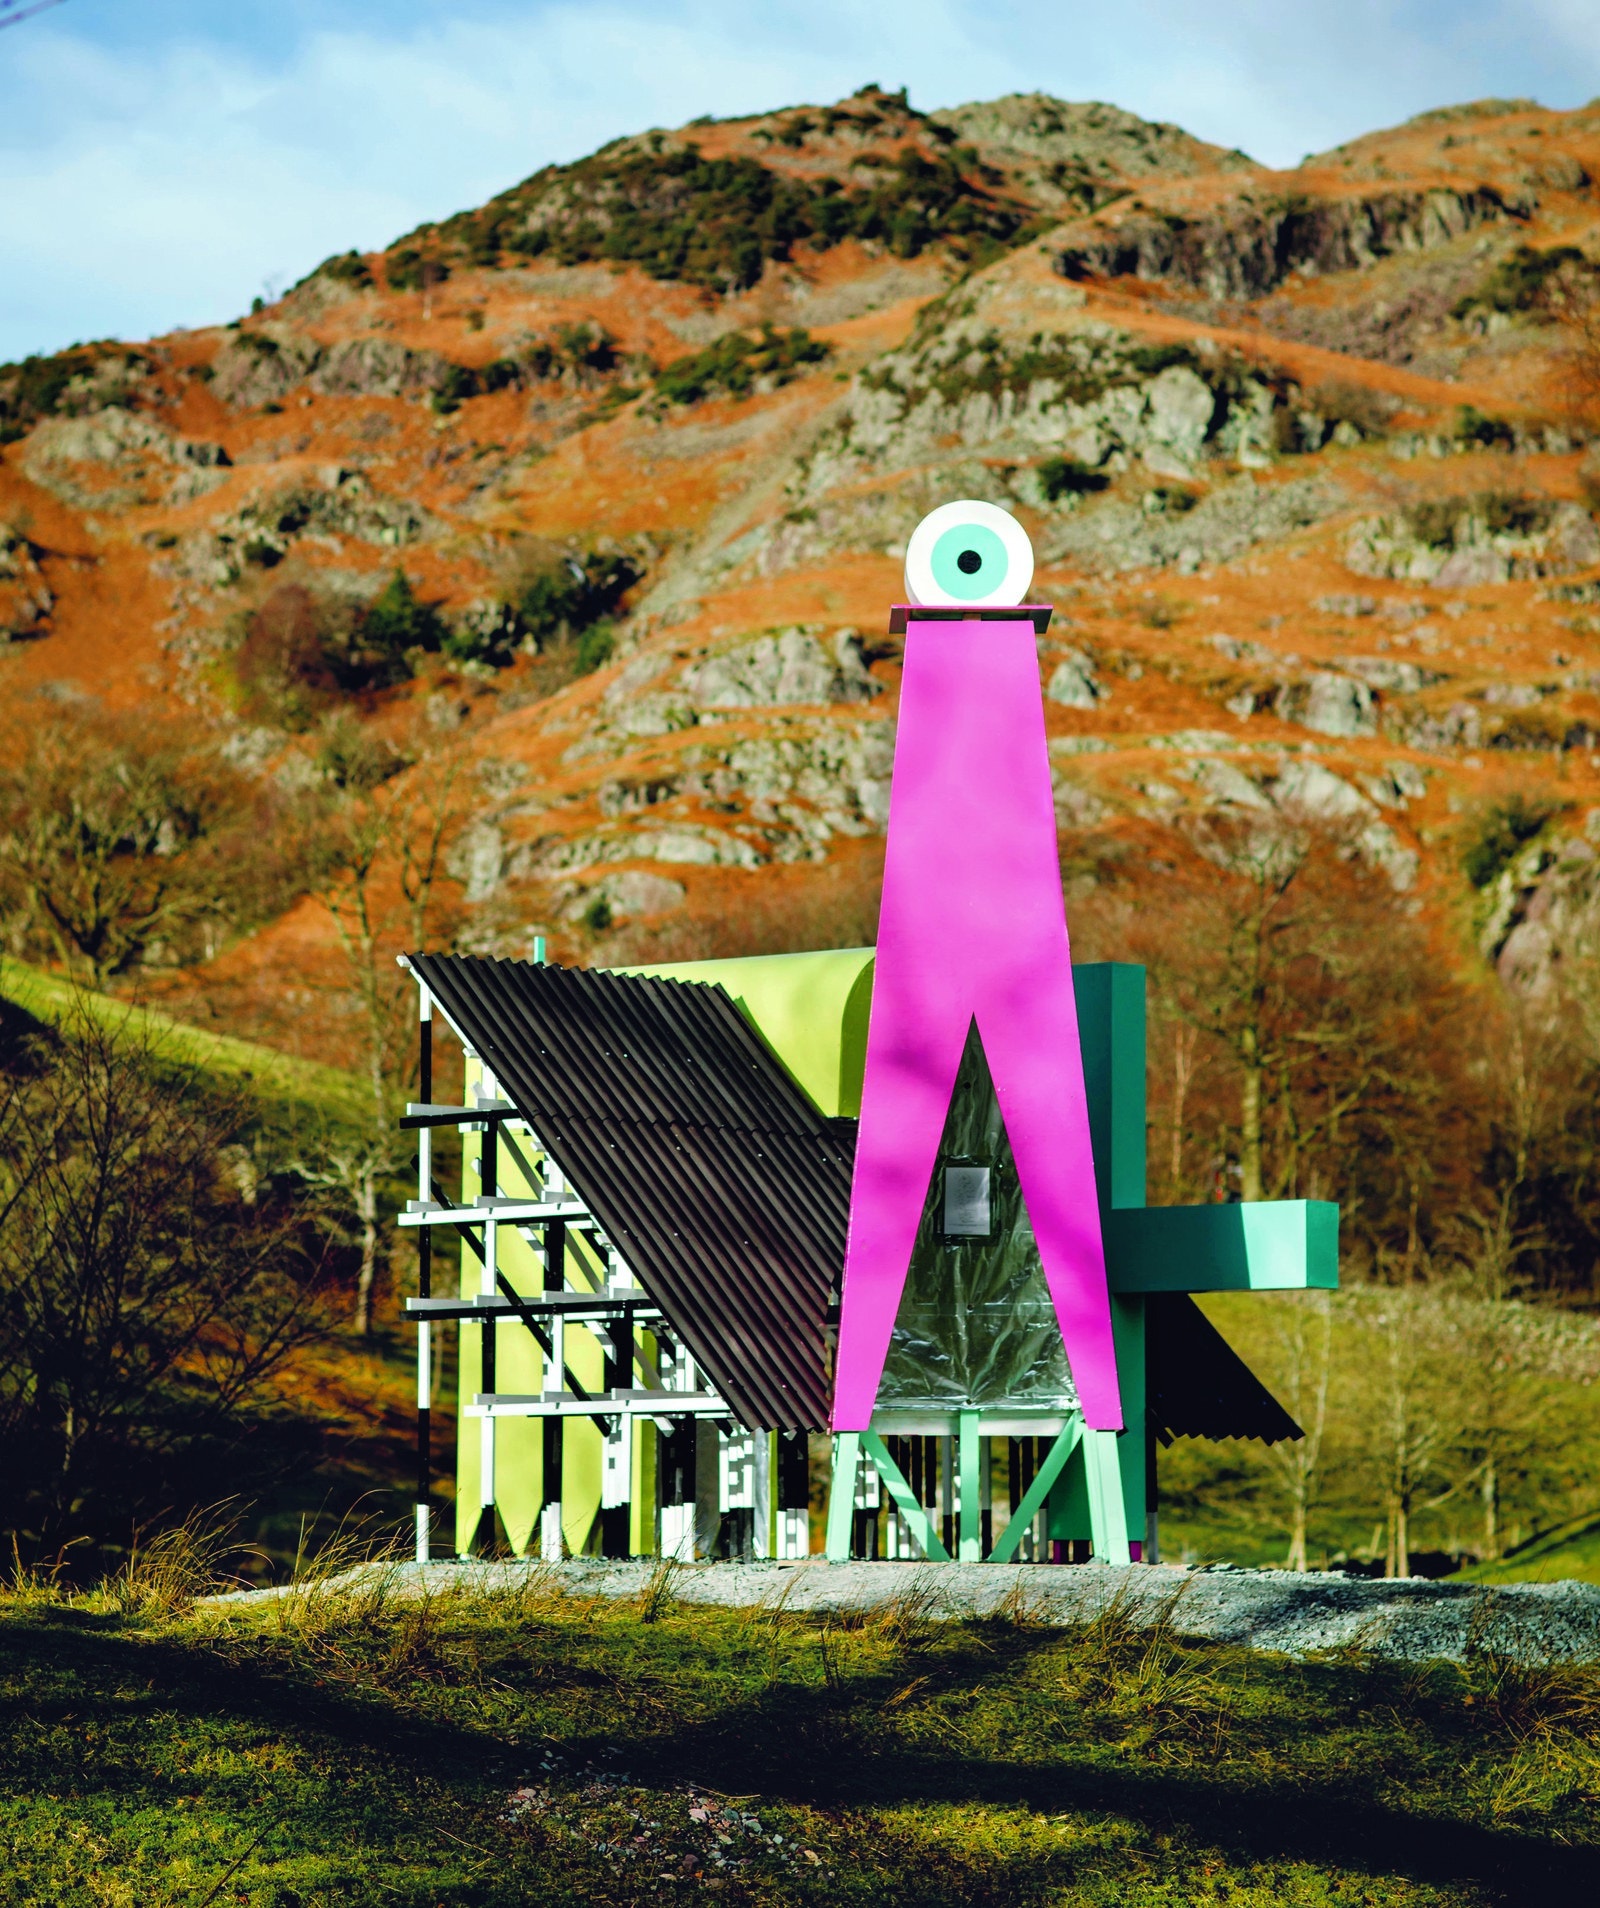 a slanted house with a giant pink sculpture and an eyeball